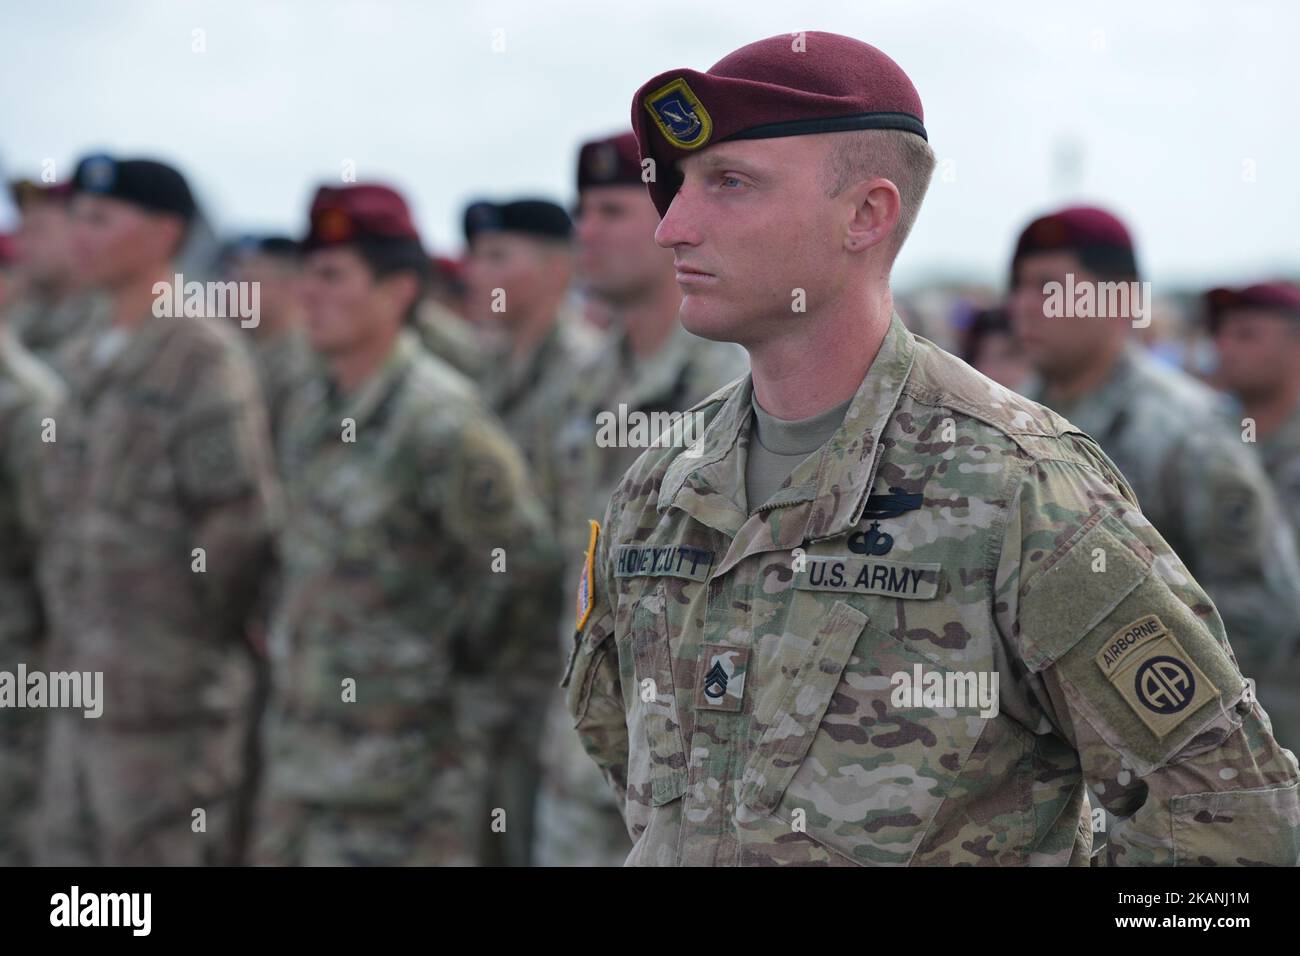 Members of the 101st Airborne Division of the US Army, during the International Commemorative Ceremony of the Allied Forces Landing in Normandy in the presence of the US Army veterans and troops, and representatives of the French State and the eight allied countries (Belgium, Canada, Denmark, United States, Great Britain, Norway, Netherlands, Poland), that took place today at Utah Beach. Tuesday 6th June is the 73rd anniversary of the D-Day landings which saw 156,000 troops from the allied countries including the United Kingdom and the United States join forces to launch an audacious attack o Stock Photo